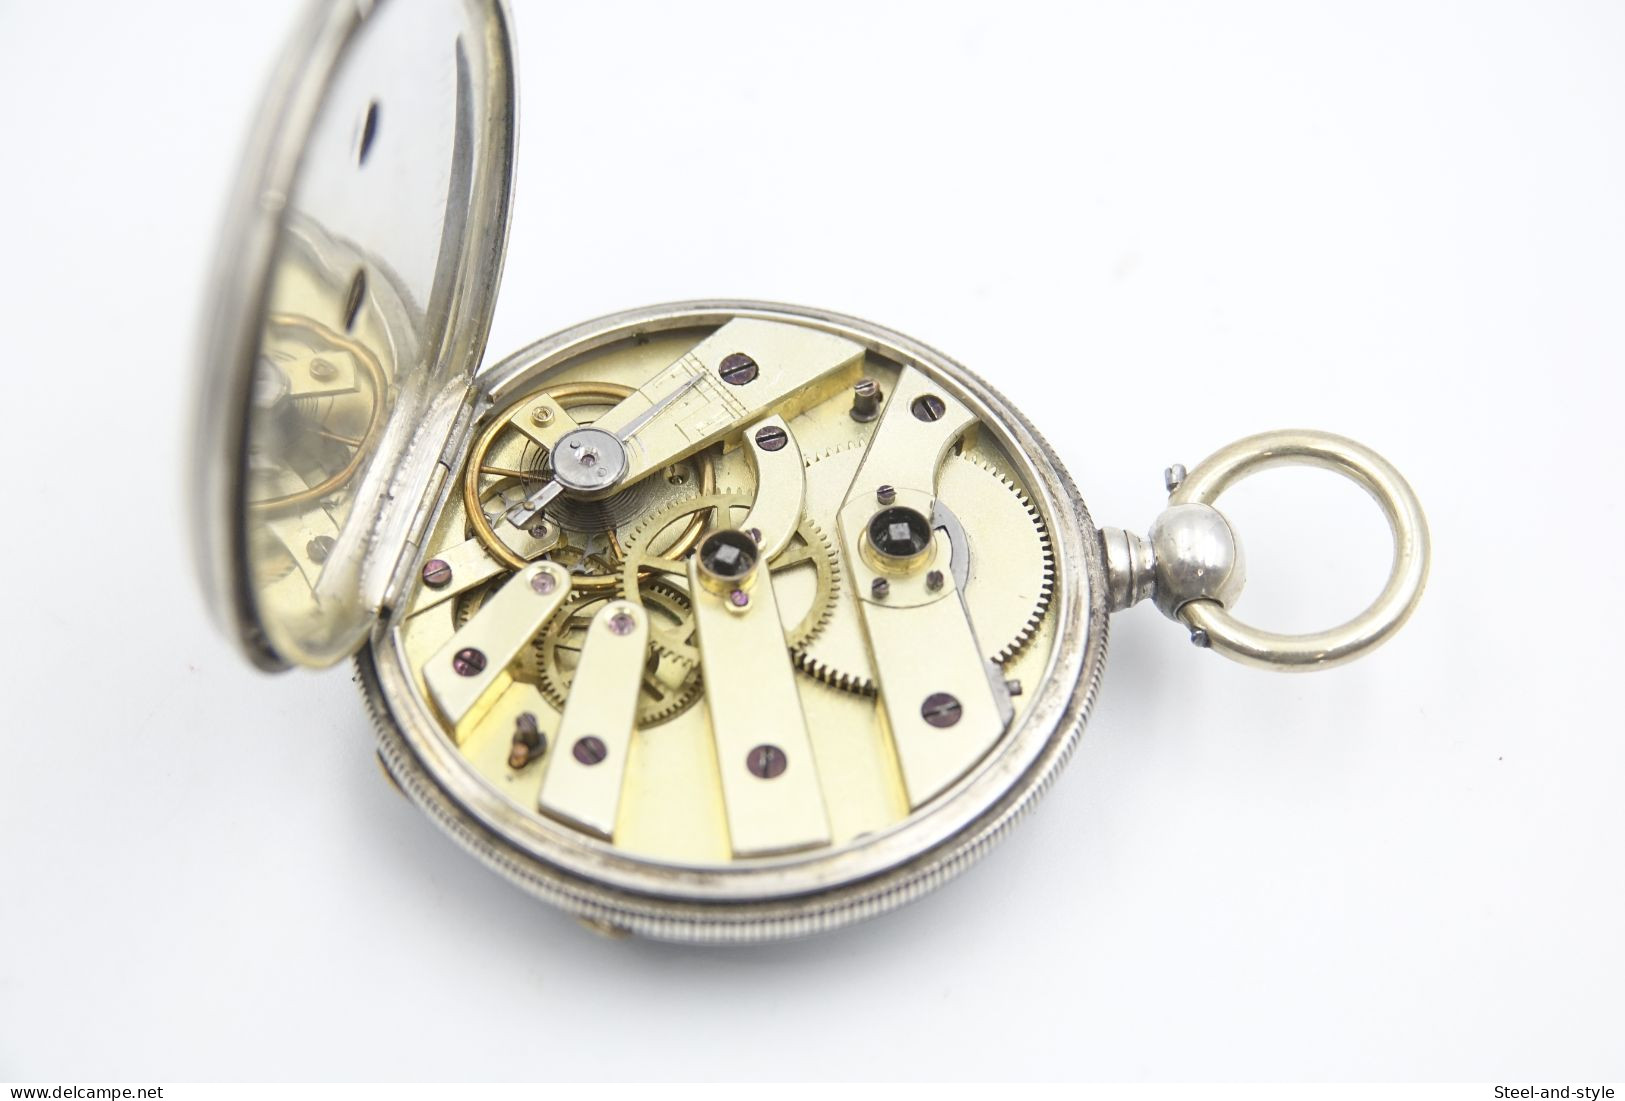 Watches : POCKET WATCH SOLID SILVER Key Winding Wide Dial Open Face 1880-900's - Original - Running - Watches: Bracket